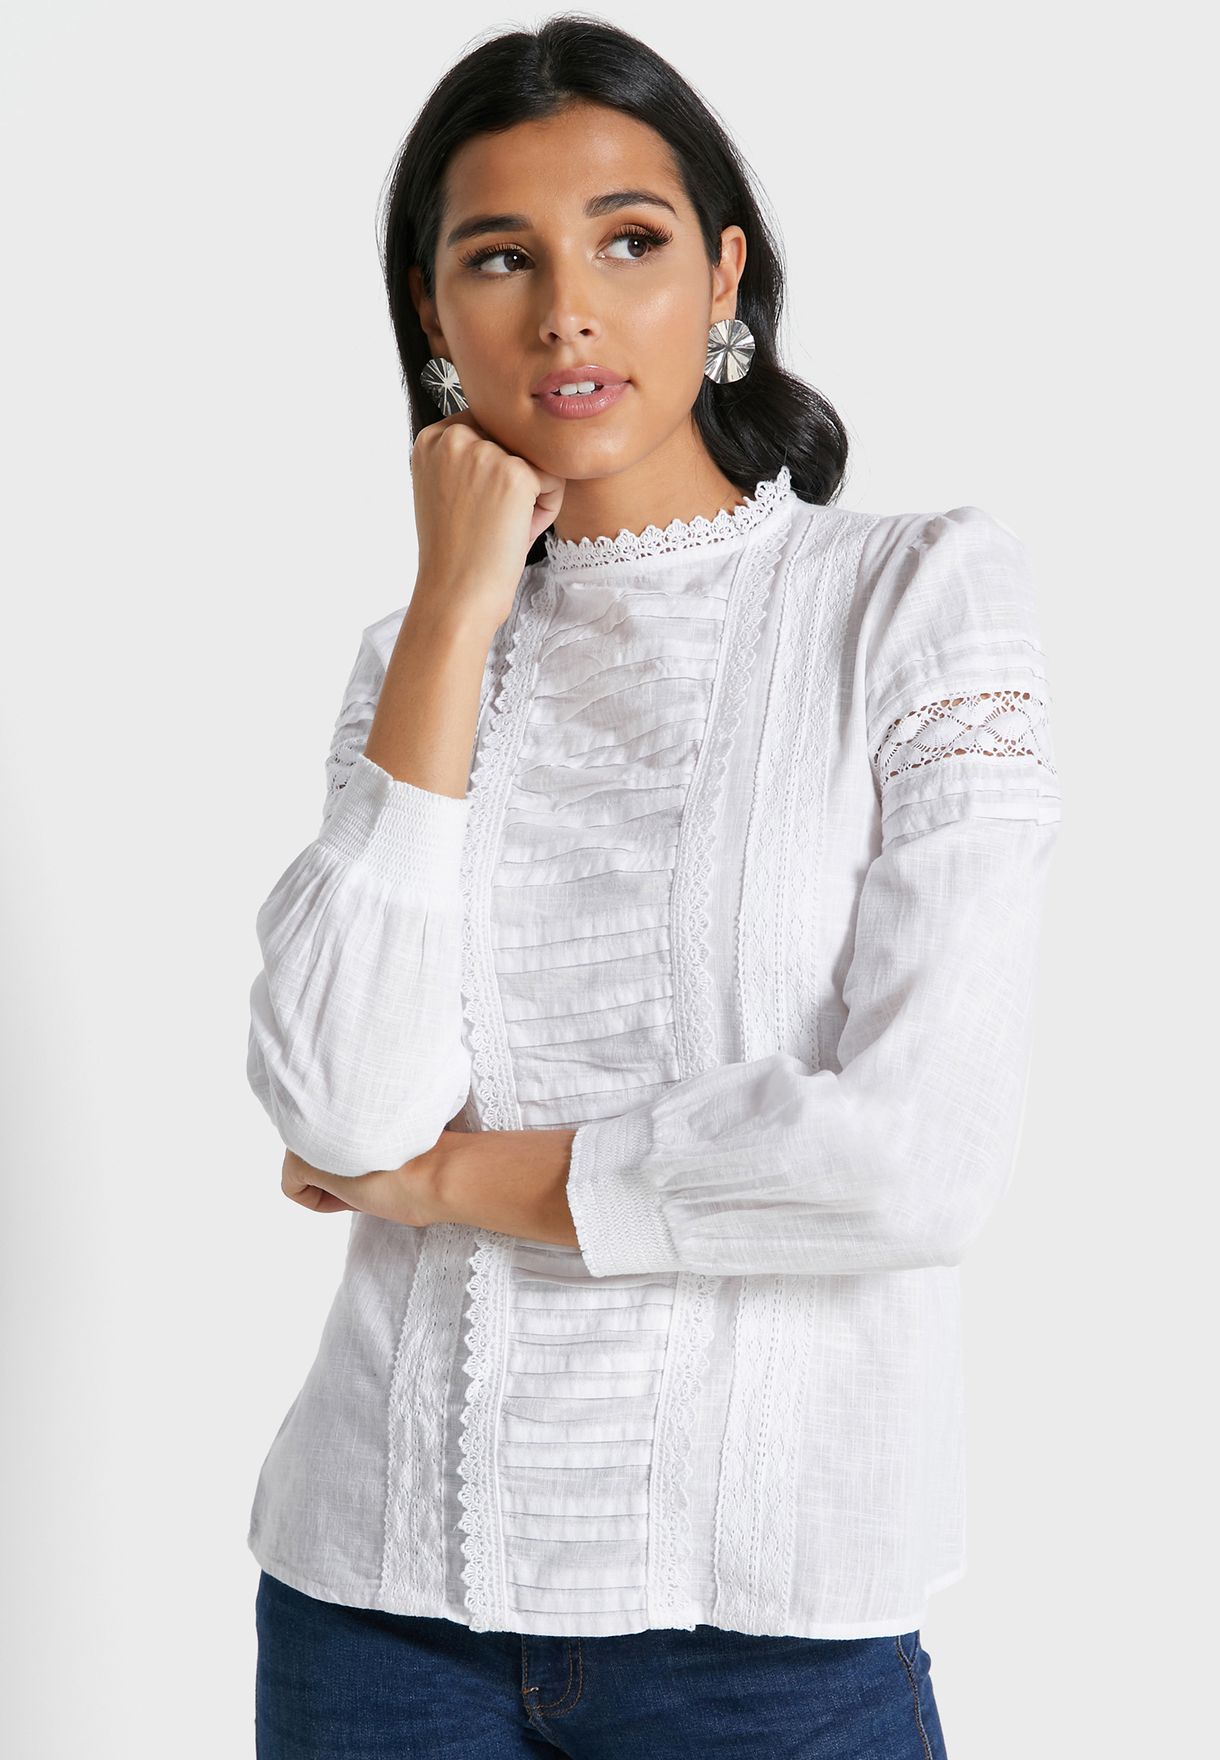 high neck lace blouse white